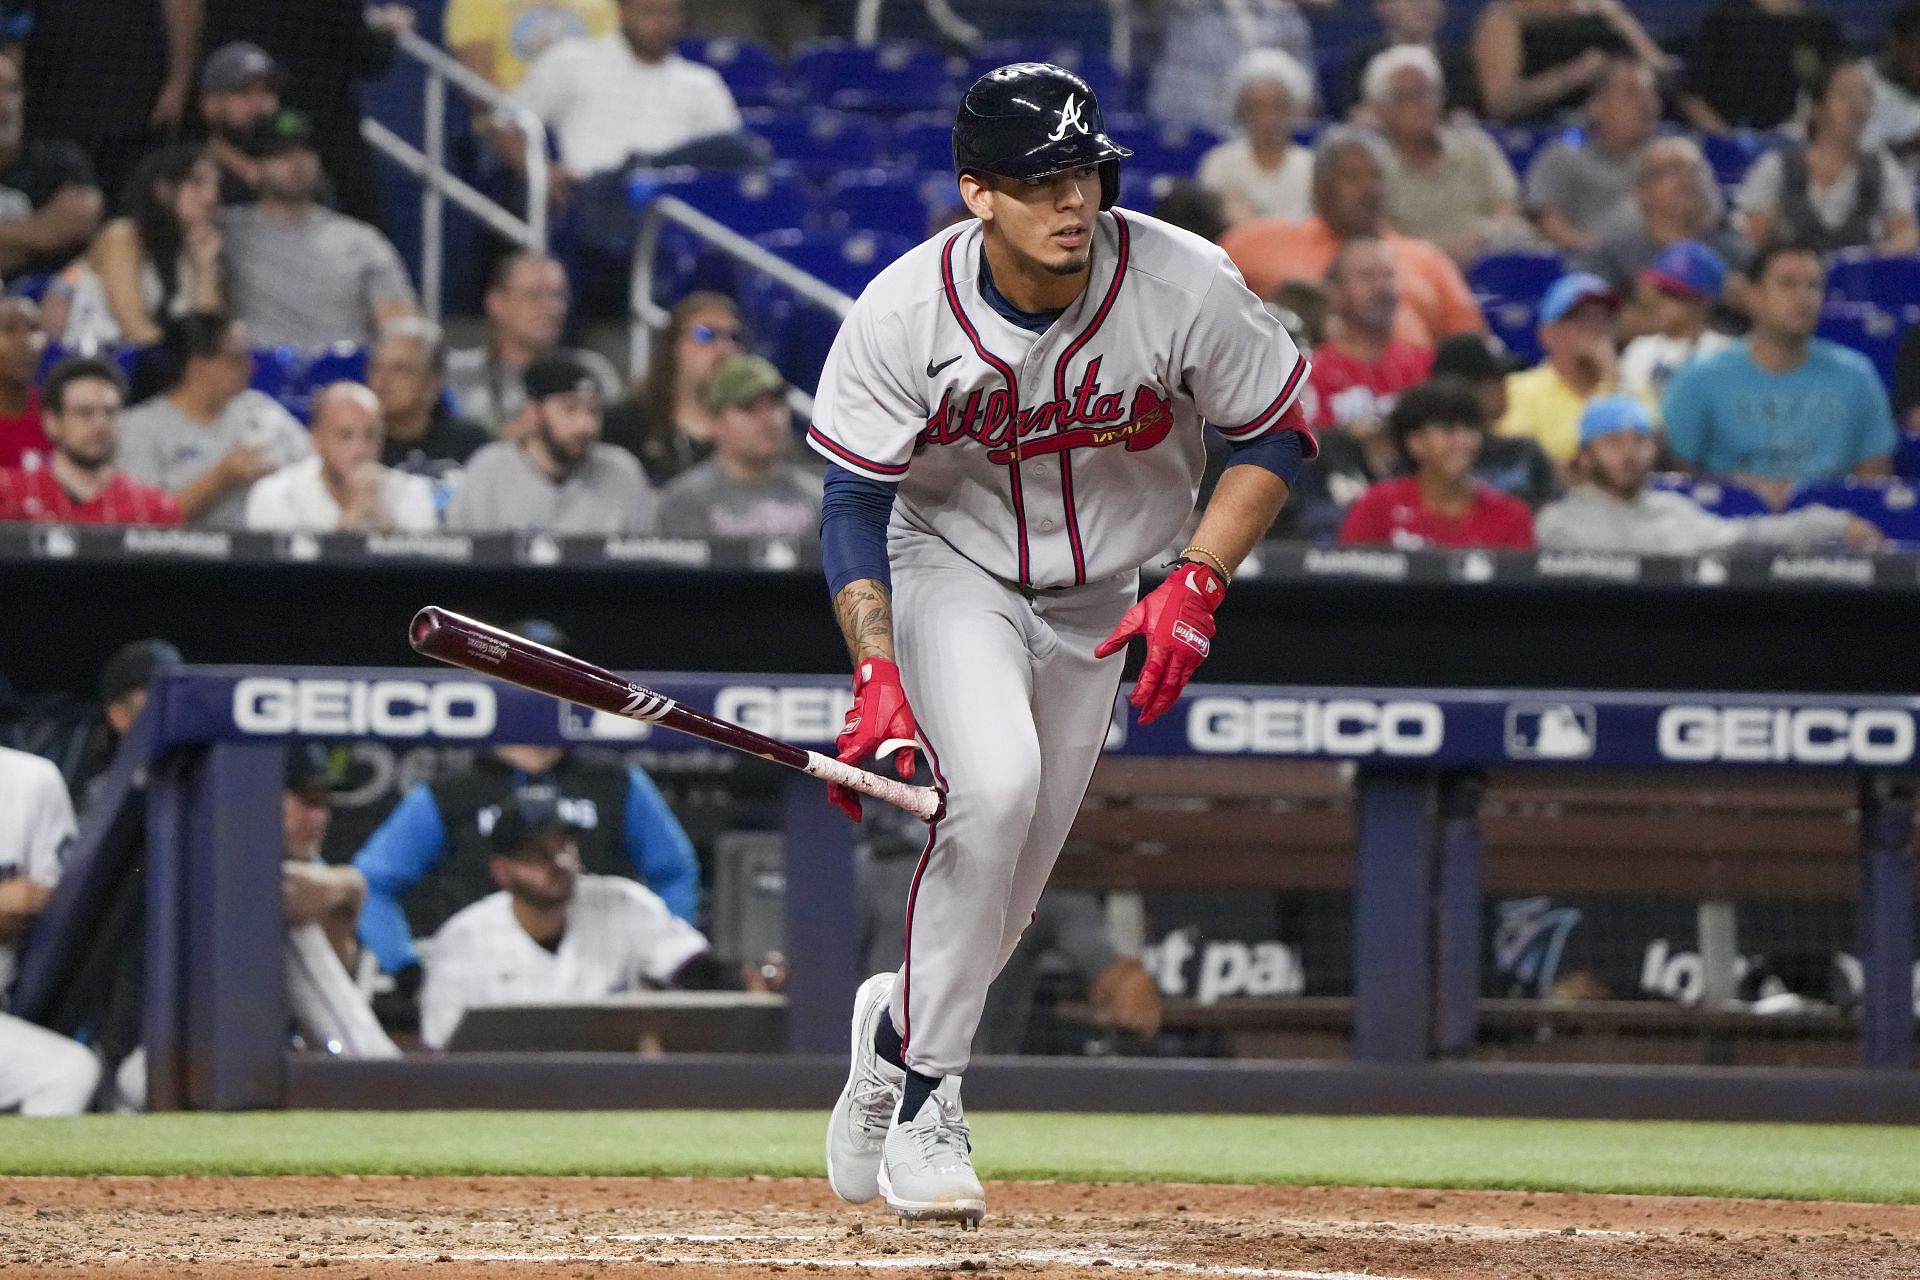 Vaughn Grissom, the Braves' top prospect, called up to majors